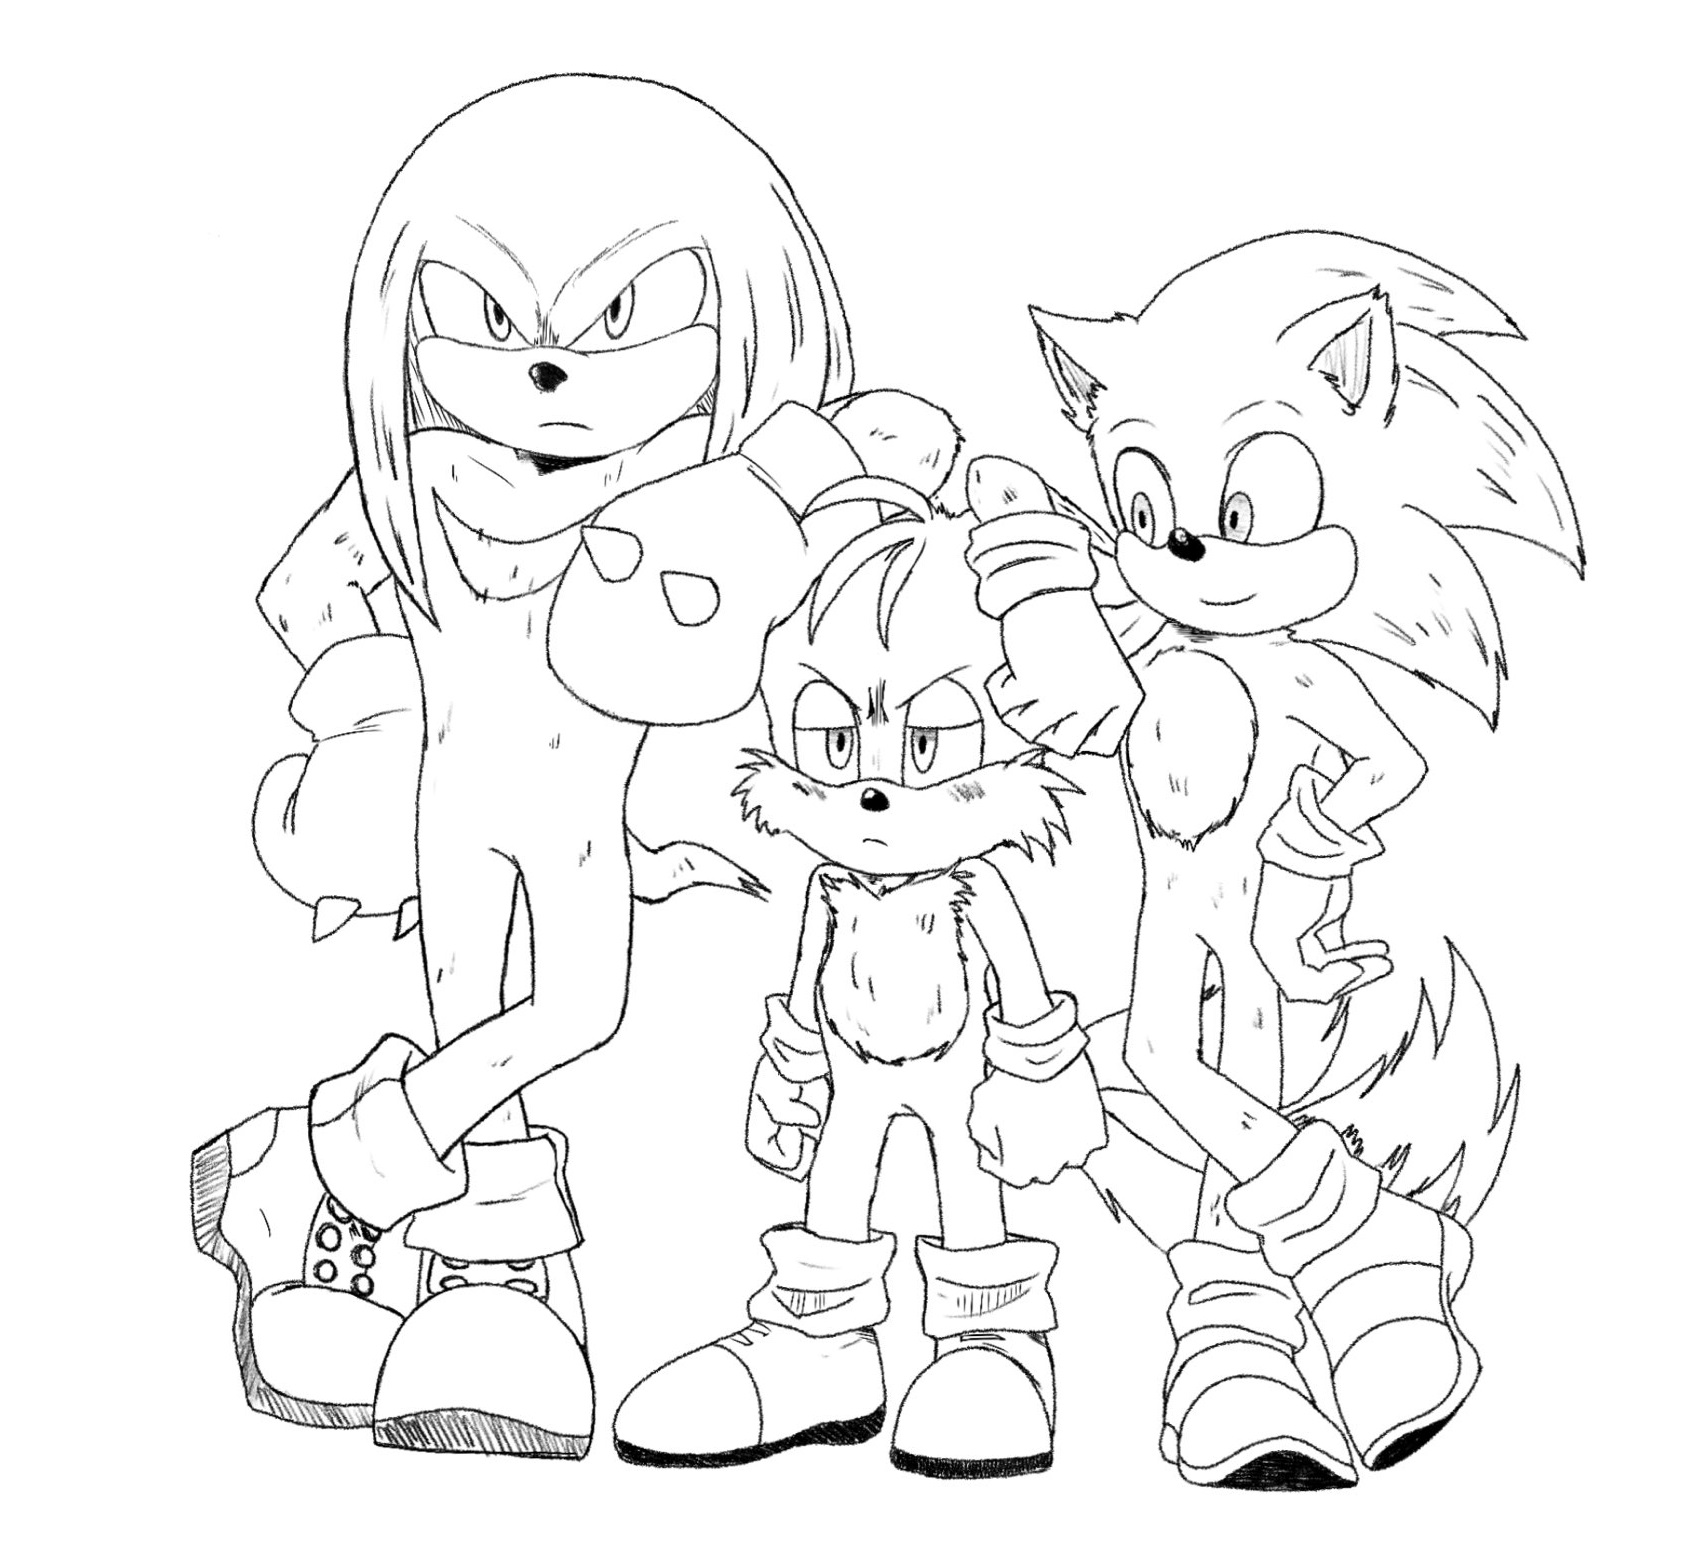 Sonic Knuckles Coloring Pages for Kids - SheetalColor.com